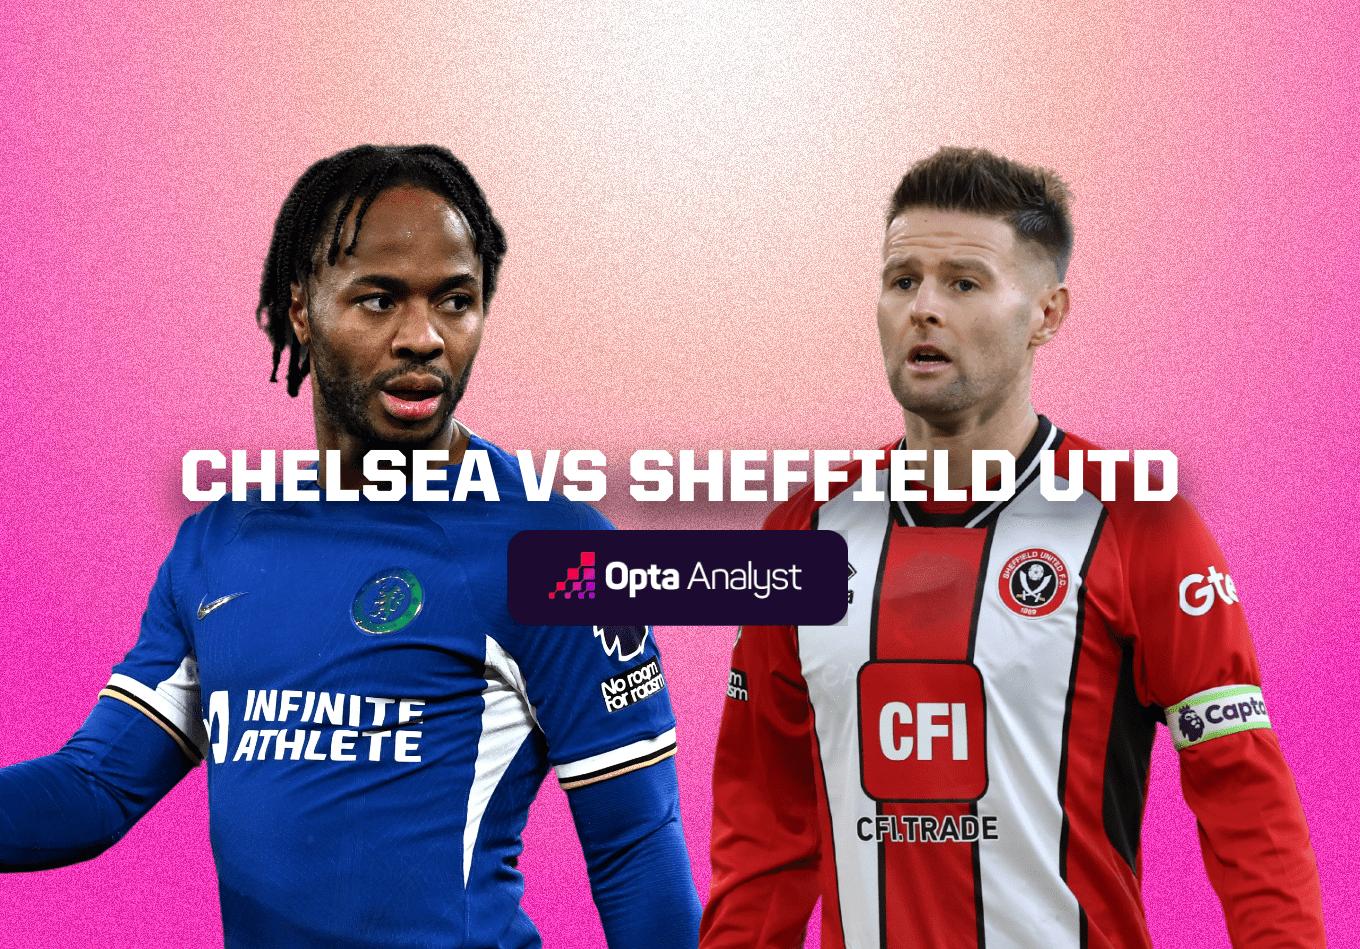 Chelsea vs Sheffield United: Prediction and Preview